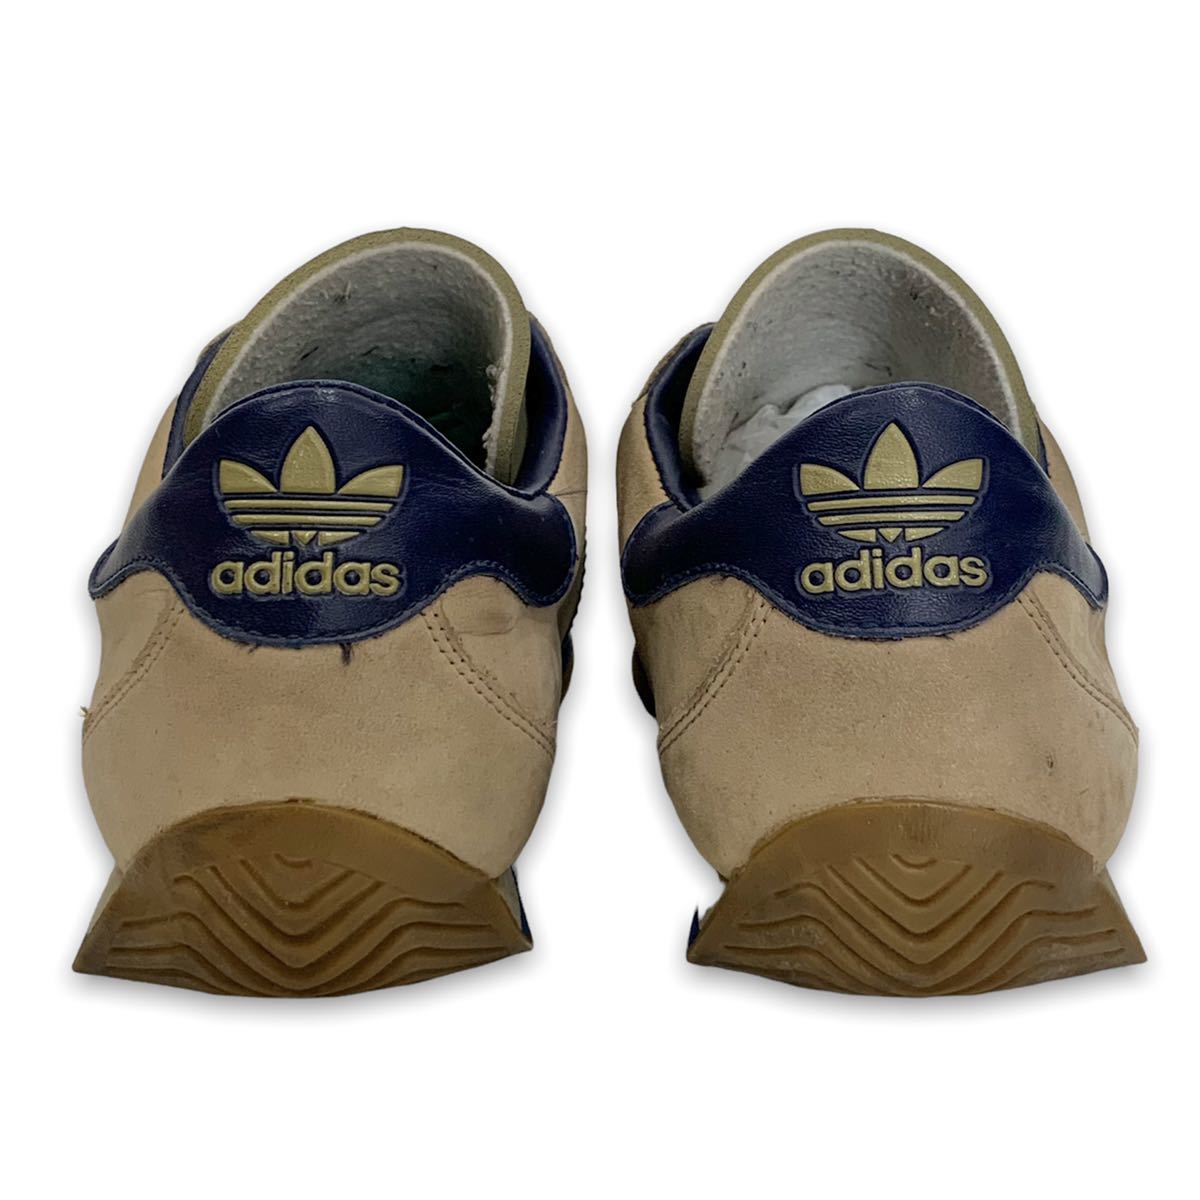  rare #adidas ( Adidas ) 98 year made Vintage COUNTRY Country sneakers n back US9 27. beige / navy [015604-693] 90s